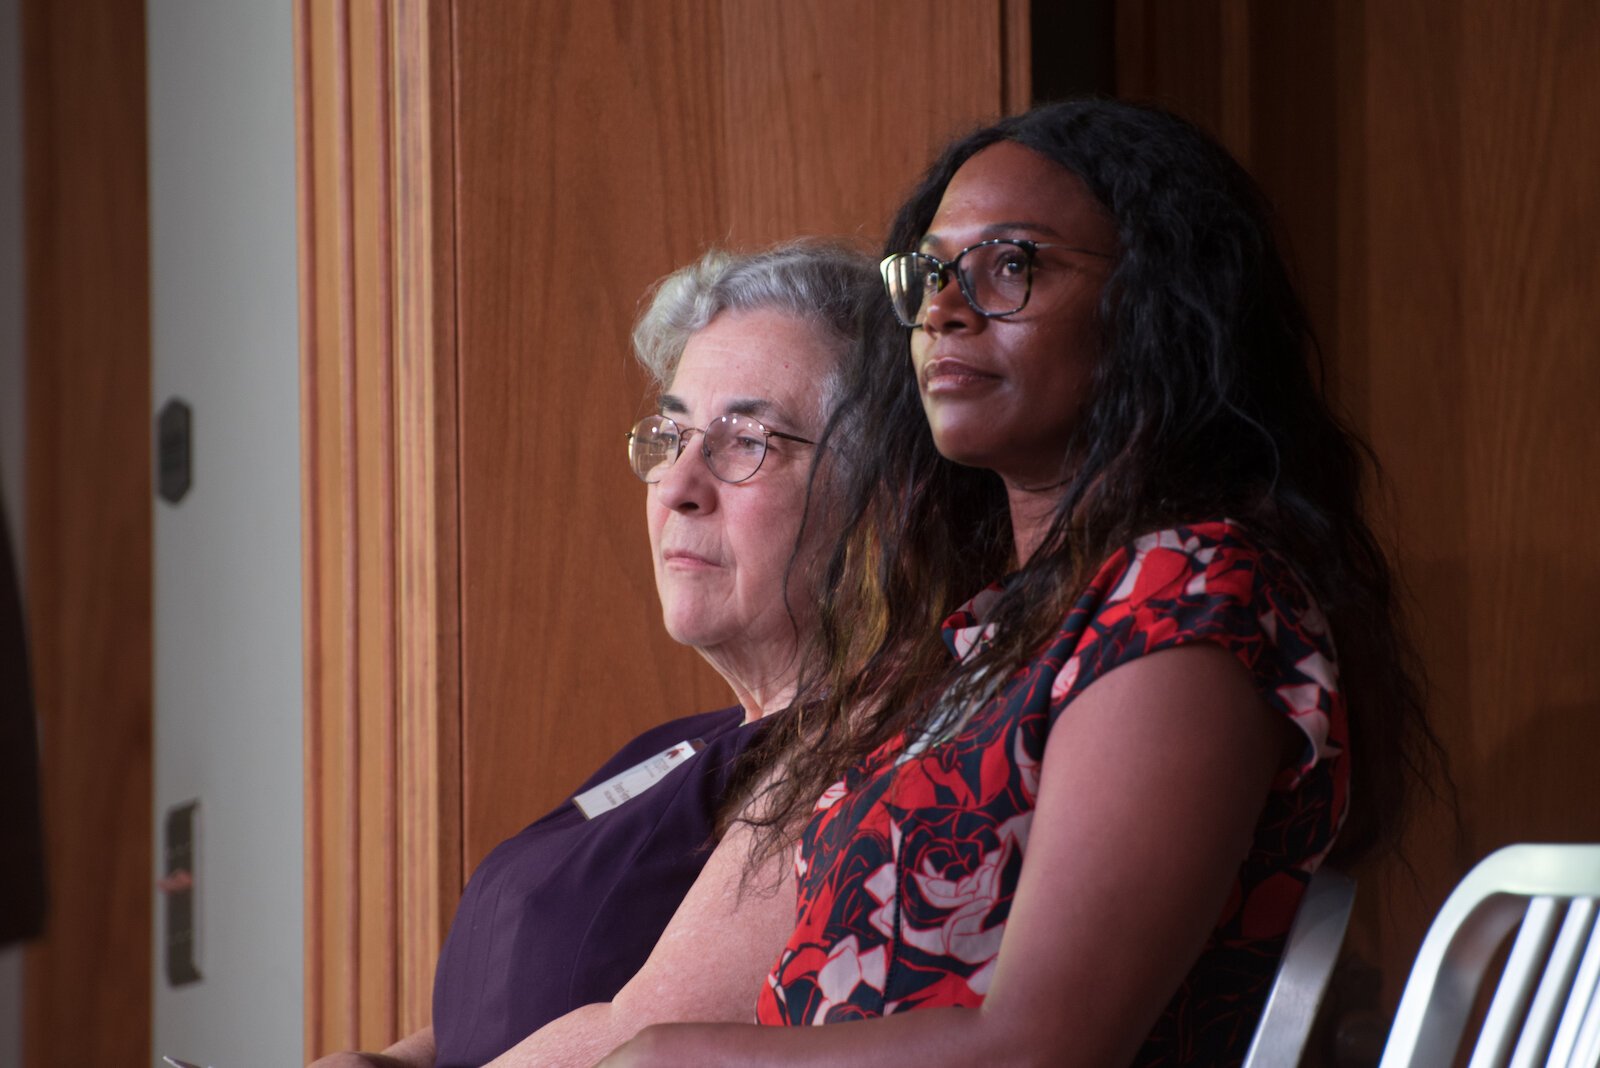 Sharon Ferraro, former Historic Preservation Coordinator of the City of Kalamazoo, and Qianna Decker, Kalamazoo City Commissioner, spoke about the unique history of the First Baptist Church.